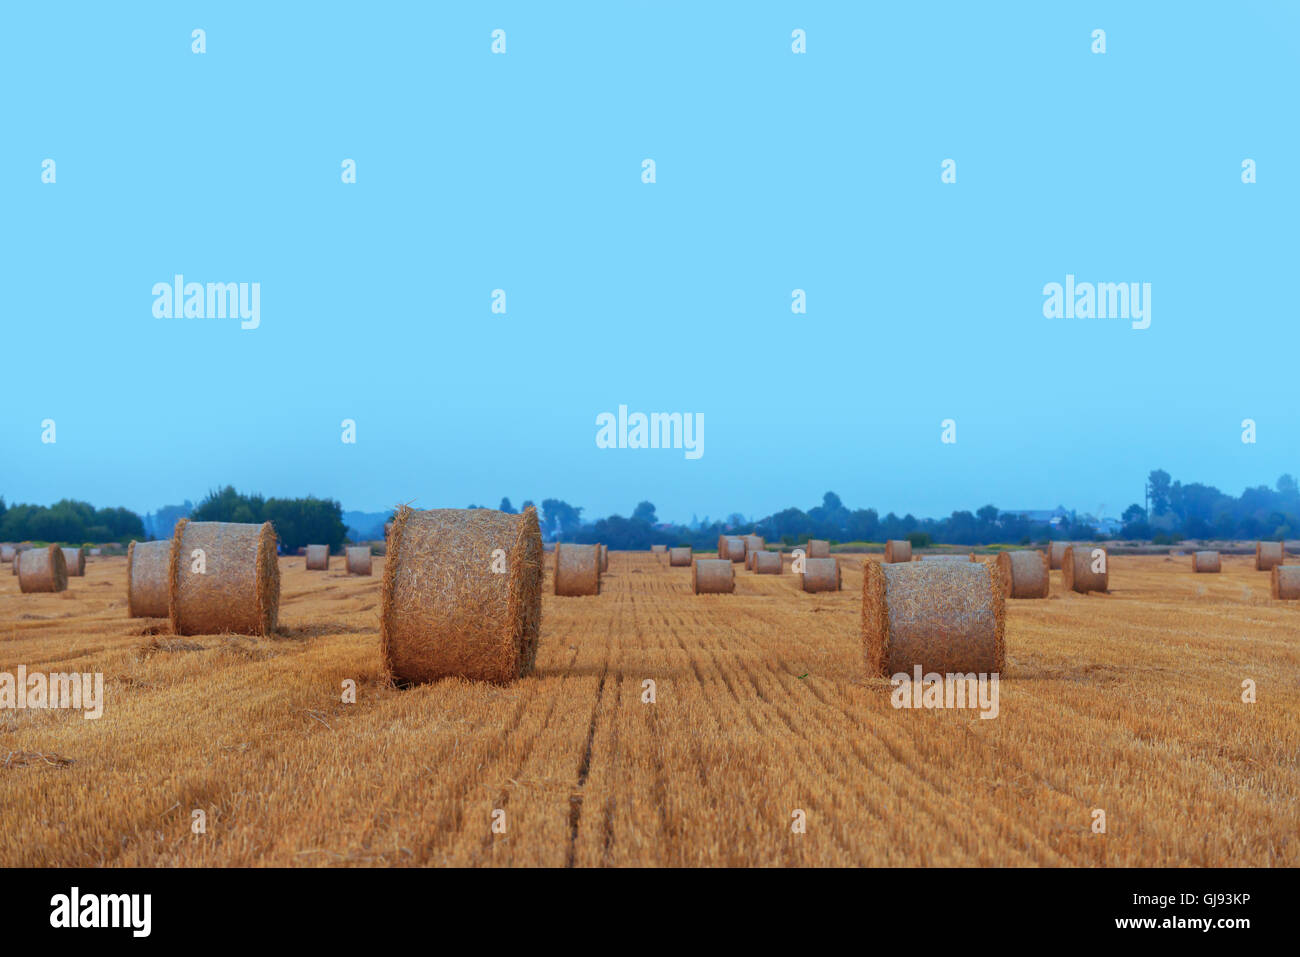 Amazing rural scene on autumn field with straw roles Stock Photo